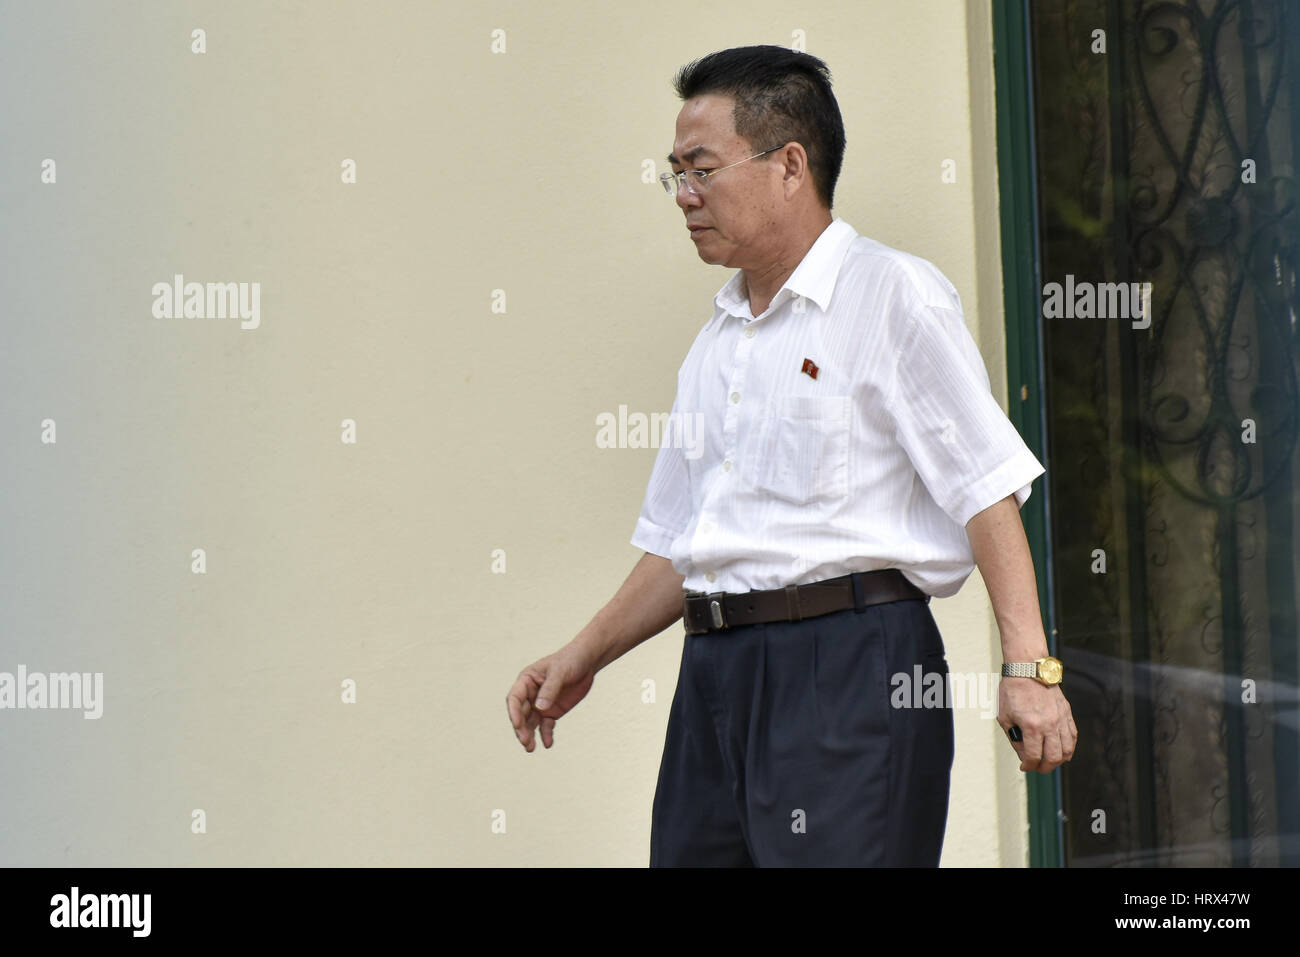 Kuala Lumpur, MALAYSIA. 5th Mar, 2017. North Korean Embassy counsellor Kim Yu Song step out from the North Korea Embassy in Kuala Lumpur, Malaysia on March 05, 2017 at Kuala Lumpur, Malaysia. North Korean Ambassador Kang Chol has accused Malaysia of colluding with foreign powers in the murder of Kim Jong-nam, must leave the country within 48 hours. Credit: Chris Jung/ZUMA Wire/Alamy Live News Stock Photo